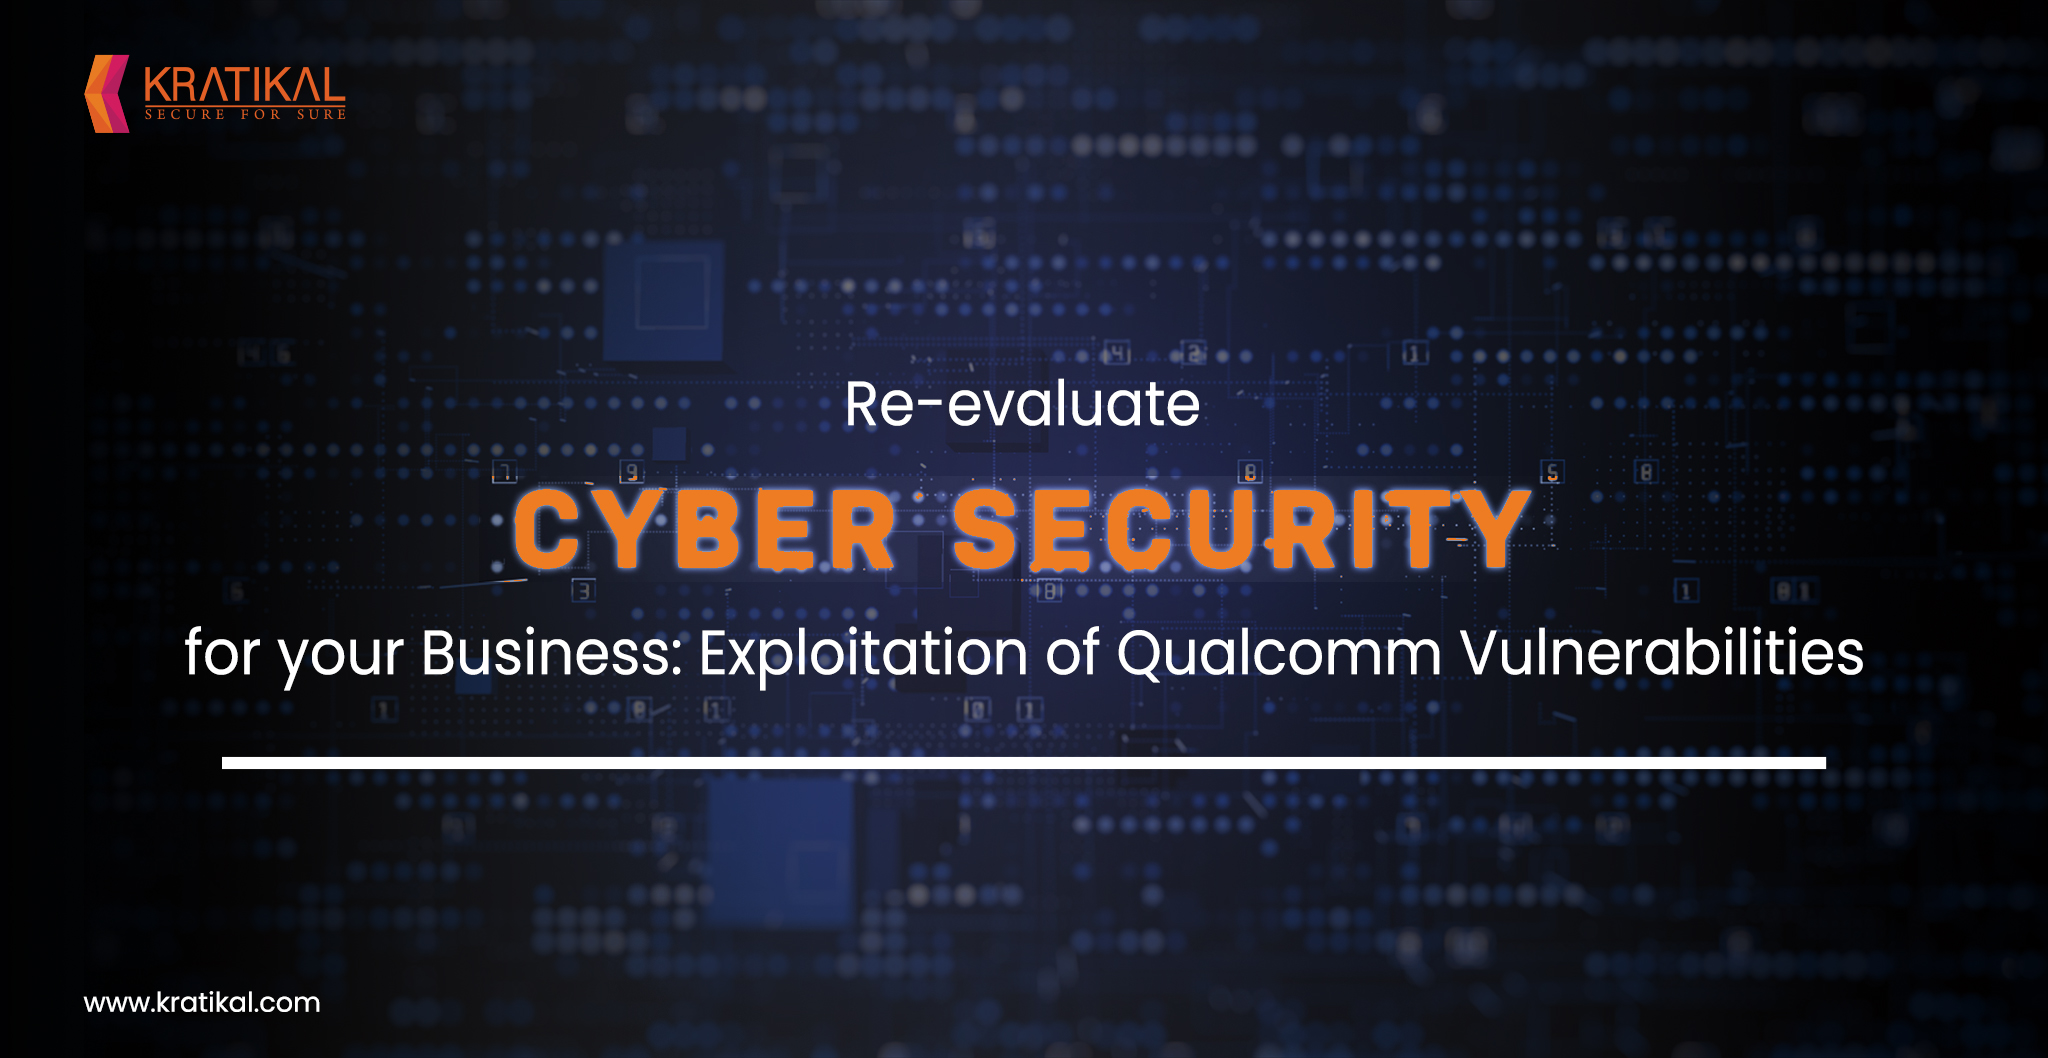 Time to Rethink Cybersecurity? Qualcomm Vulnerabilities Exploited